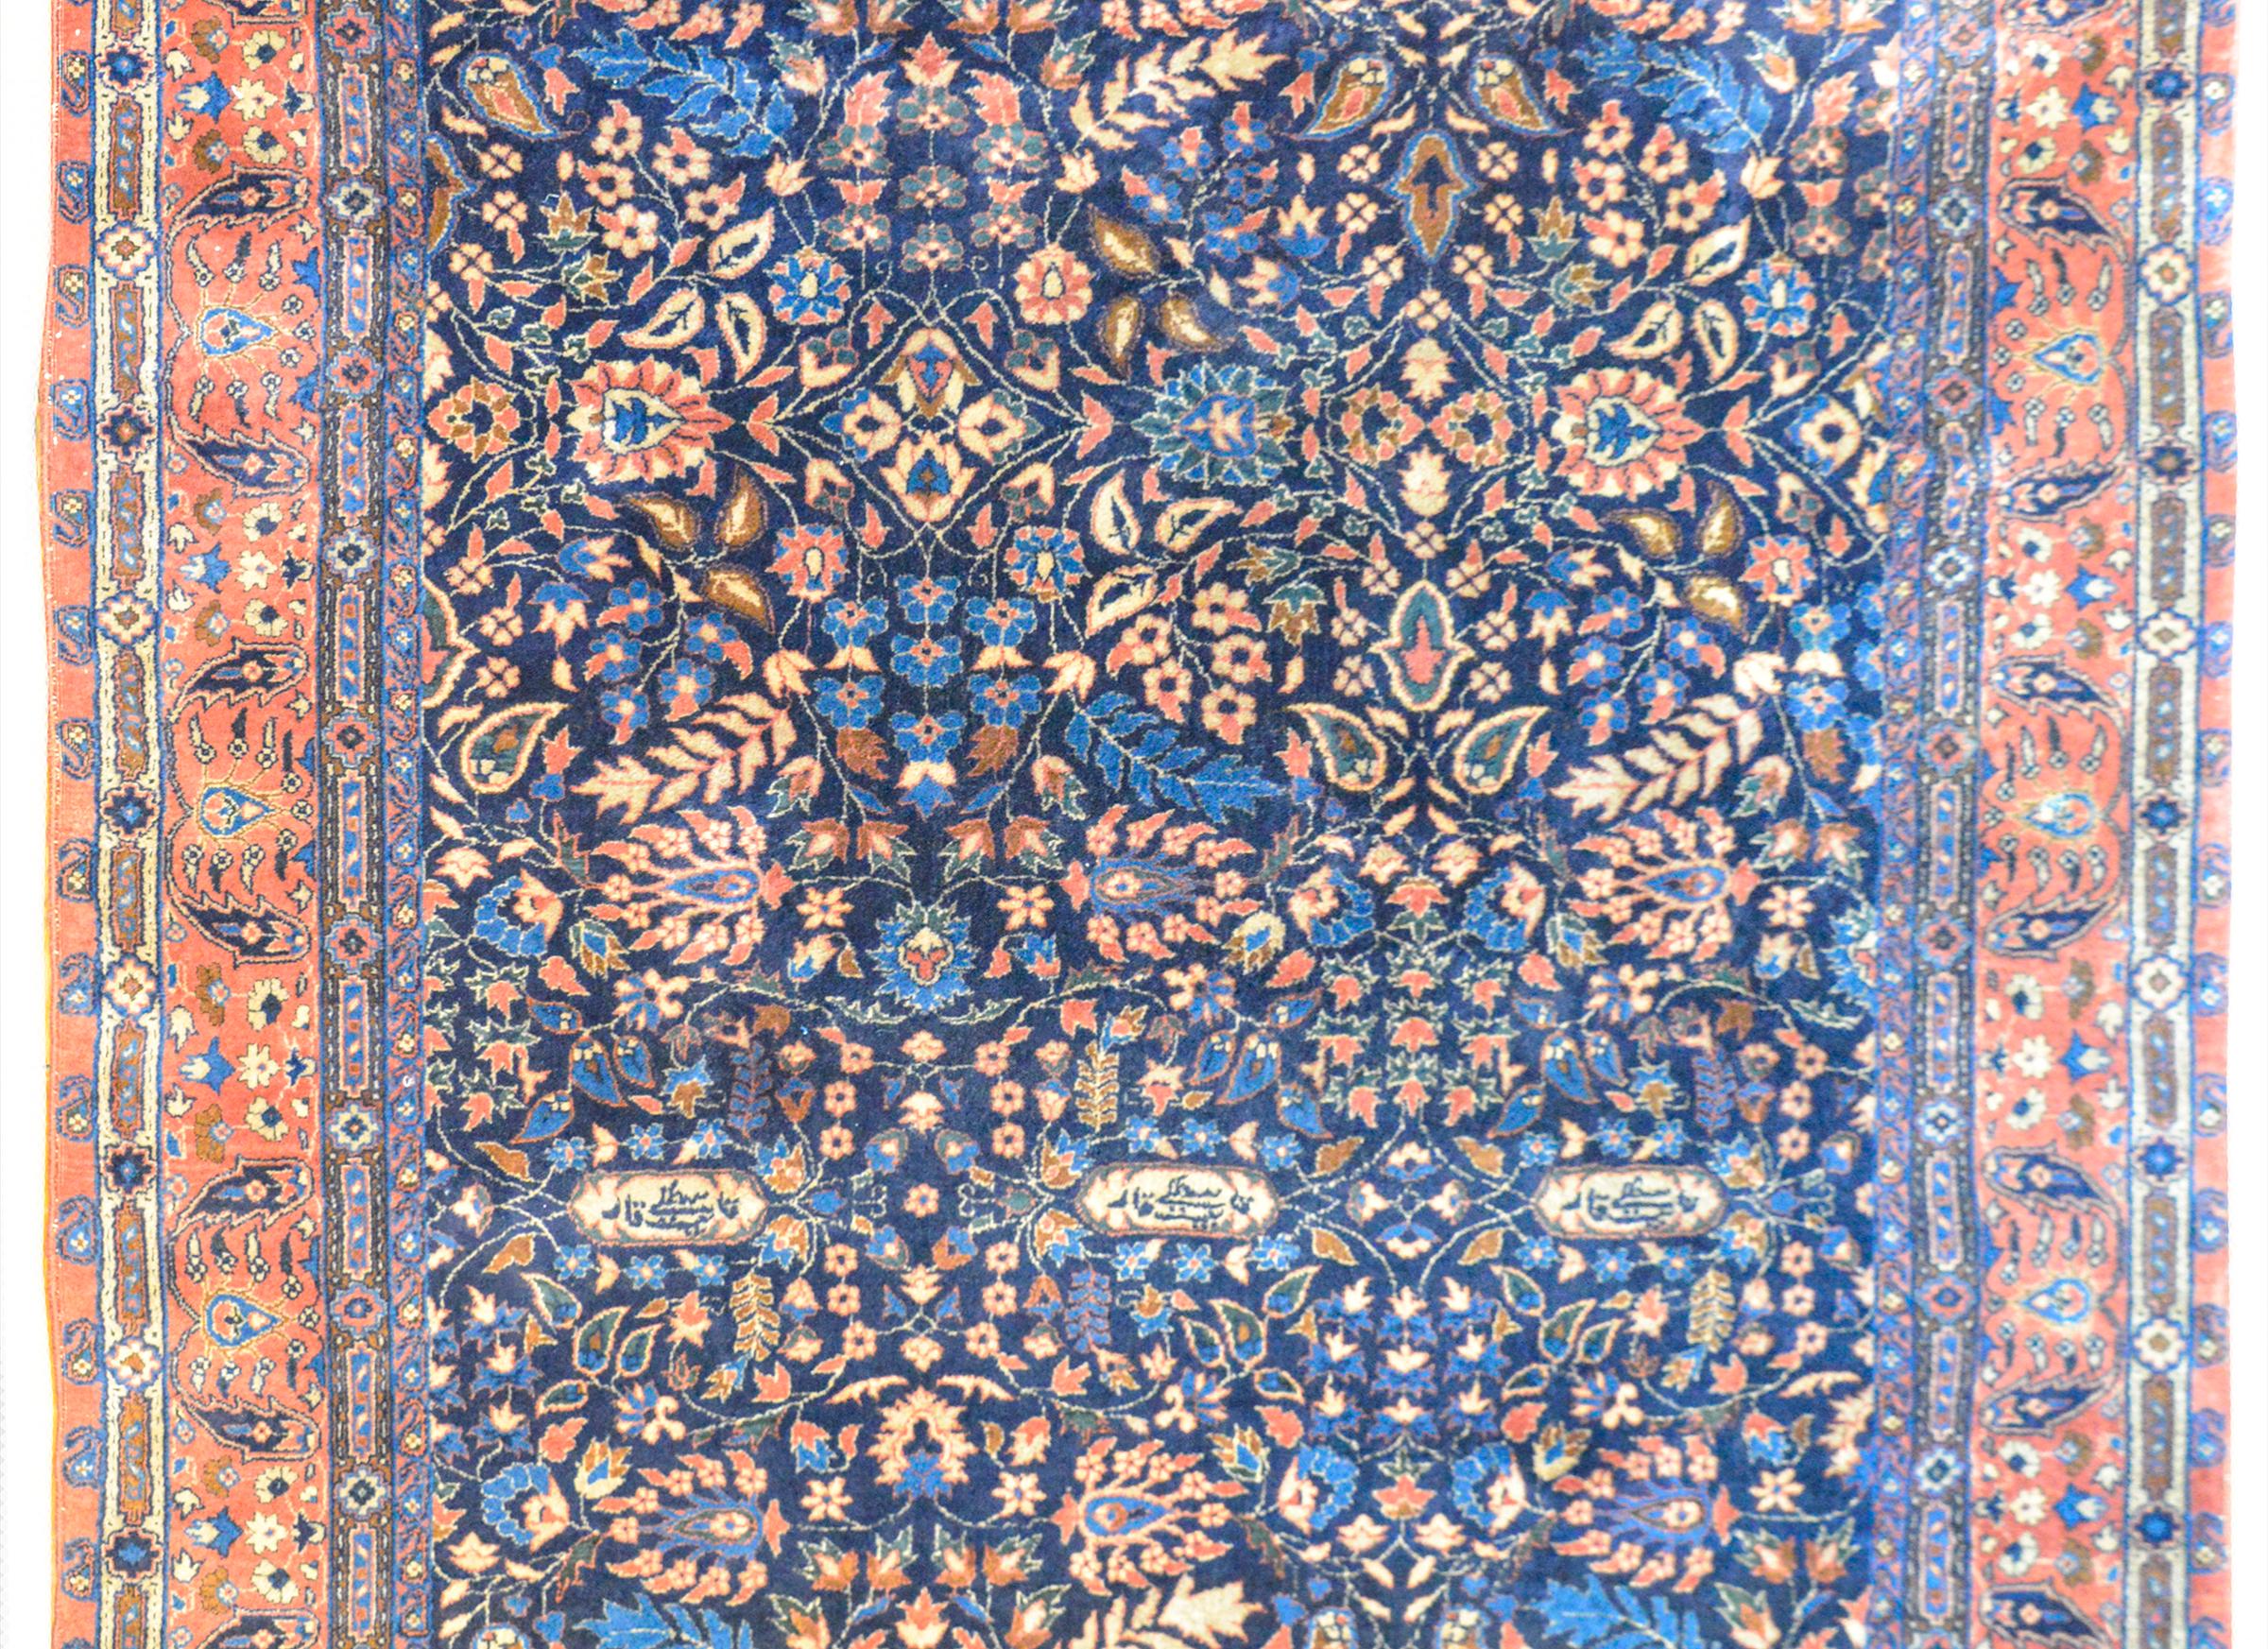 A wonderful early 20th century Indian Larastan rug with an all-over mirrored floral and scrolling vine pattern with myriad flowers and leaves woven in light and dark indigo, cream, brown, and coral against a dark indigo background. The border is